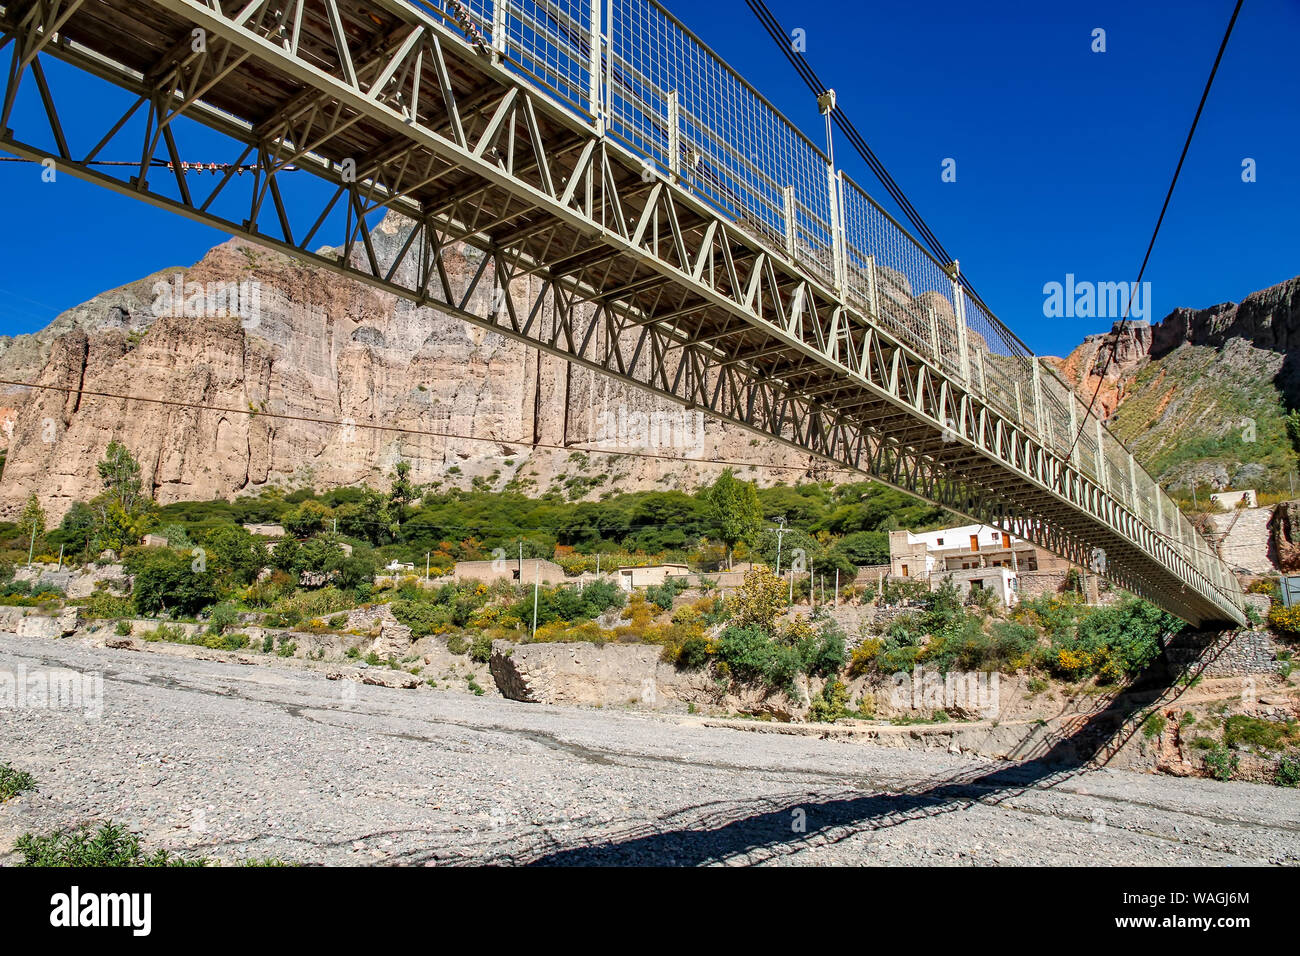 View on under a bridge in Iruya, Argentina, South America on a sunny day. Stock Photo